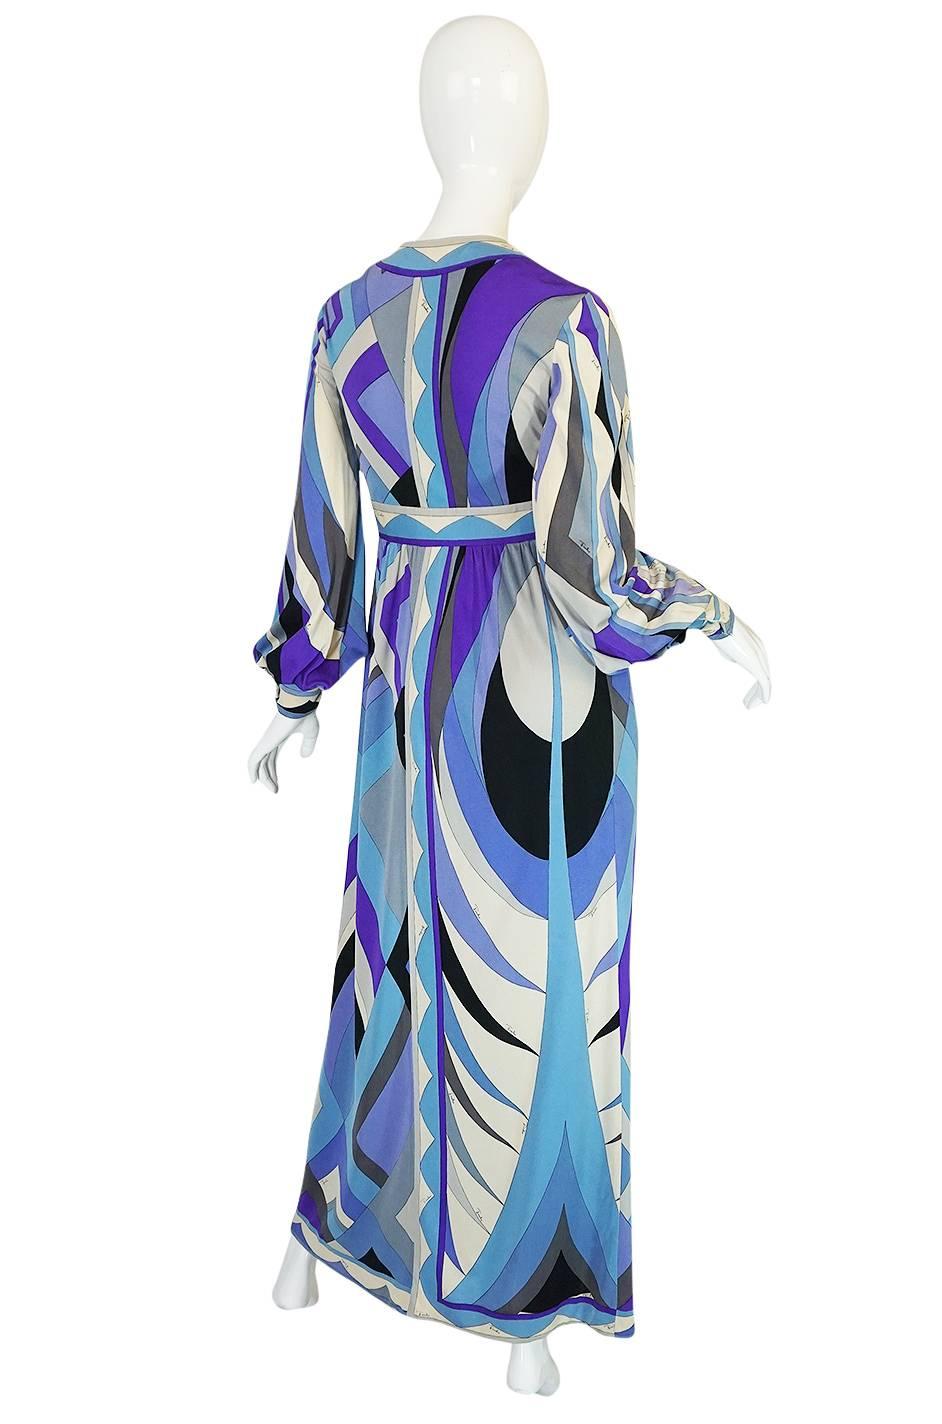 An absolutely gorgeous Pucci dress with a sublime and chic color palette in soft blues and lavenders mixed with greys and off-white. It is made from his signature lightweight silk jersey and has one of his signature custom screened designs running